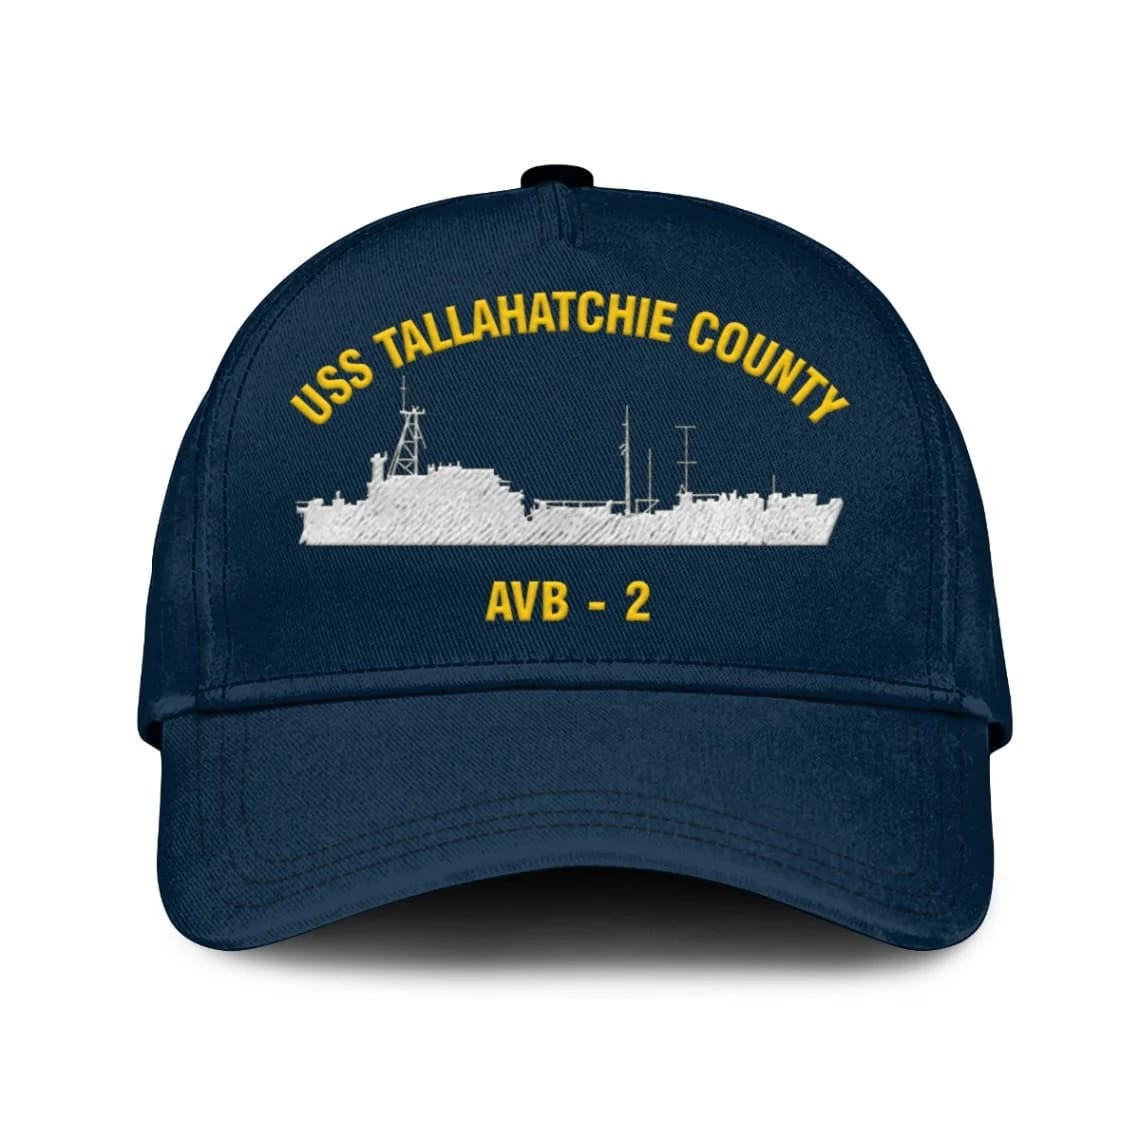 Us Navy Veteran Cap, Embroidered Cap, Uss Tallahatchie County Avb 8211 2 Classic 3D Embroidered Hats